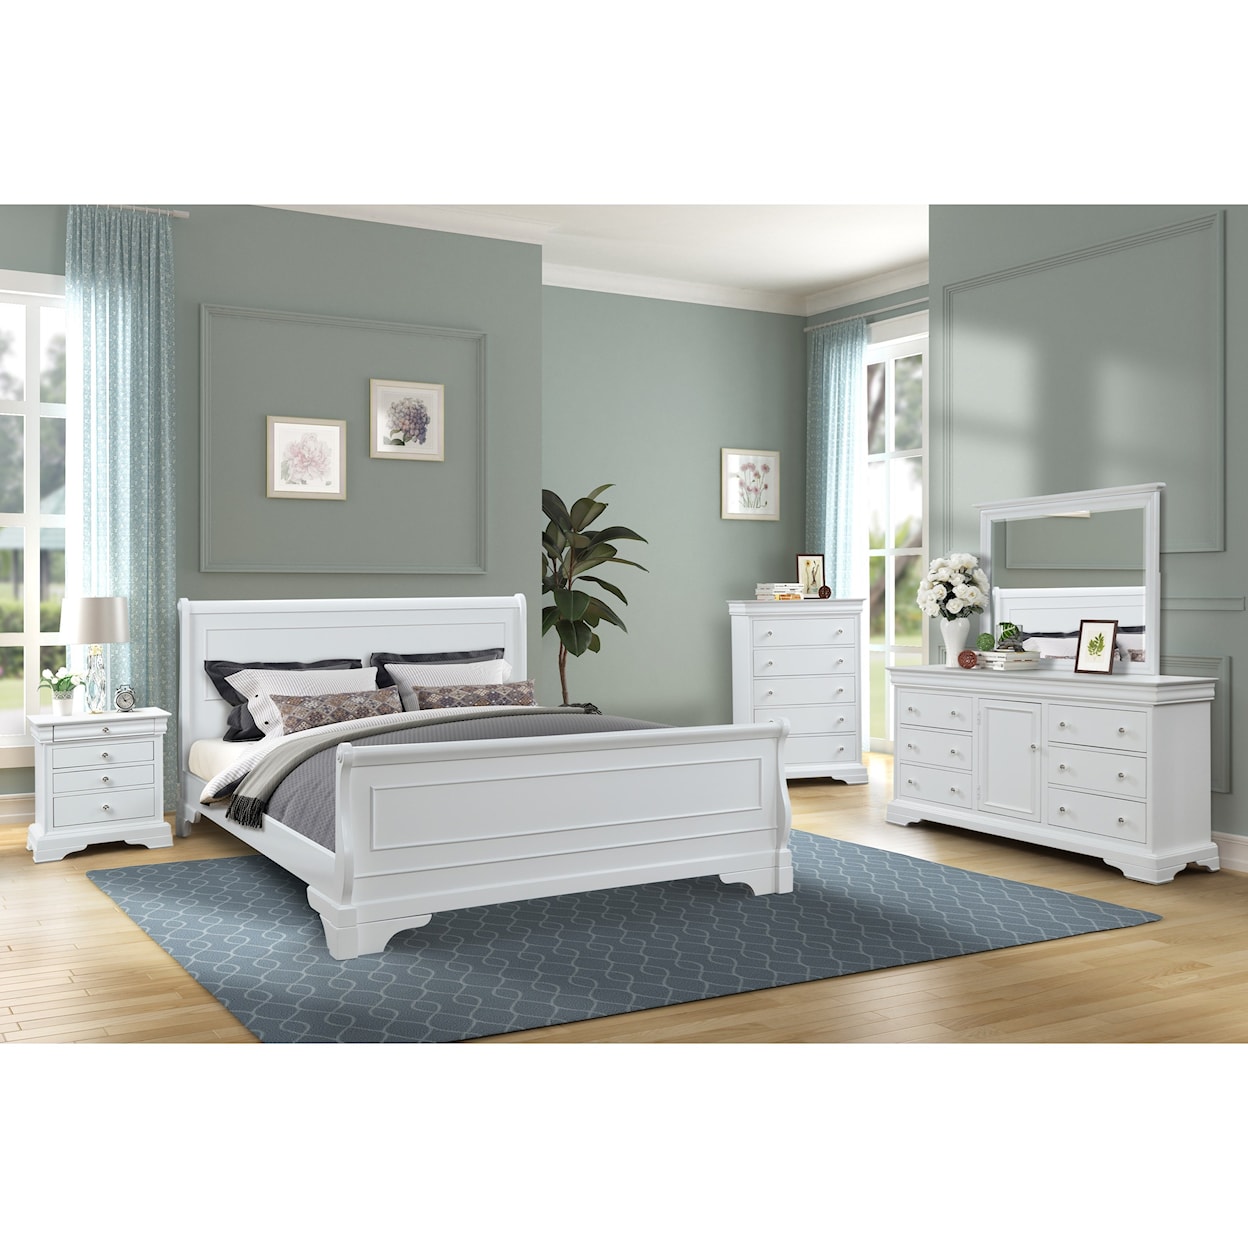 New Classic Versaille King Bedroom Group